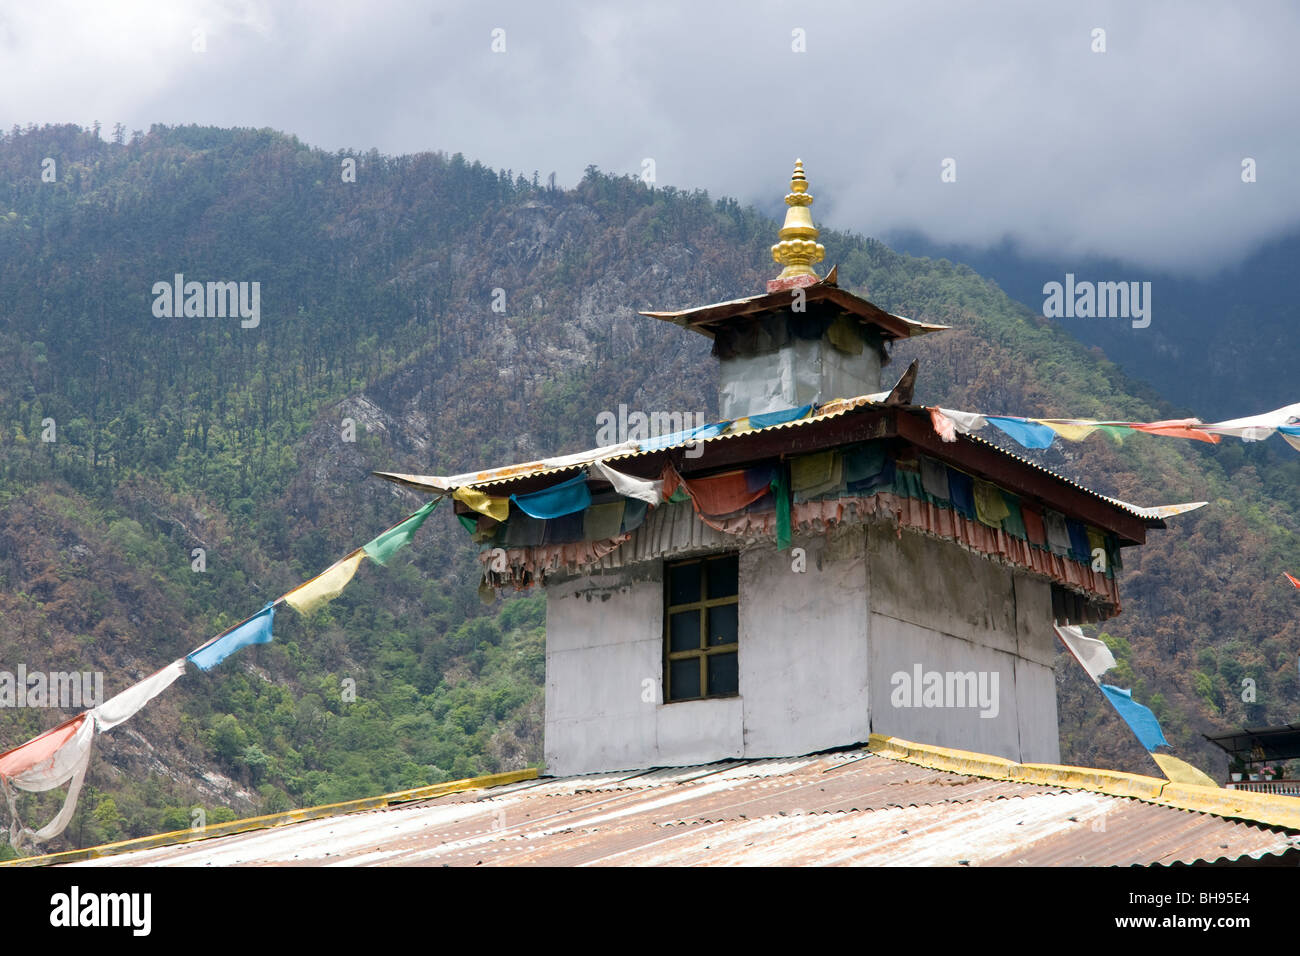 temple roof of corrugated iron with prayer flags in the tibetan border town of zhangmu Stock Photo